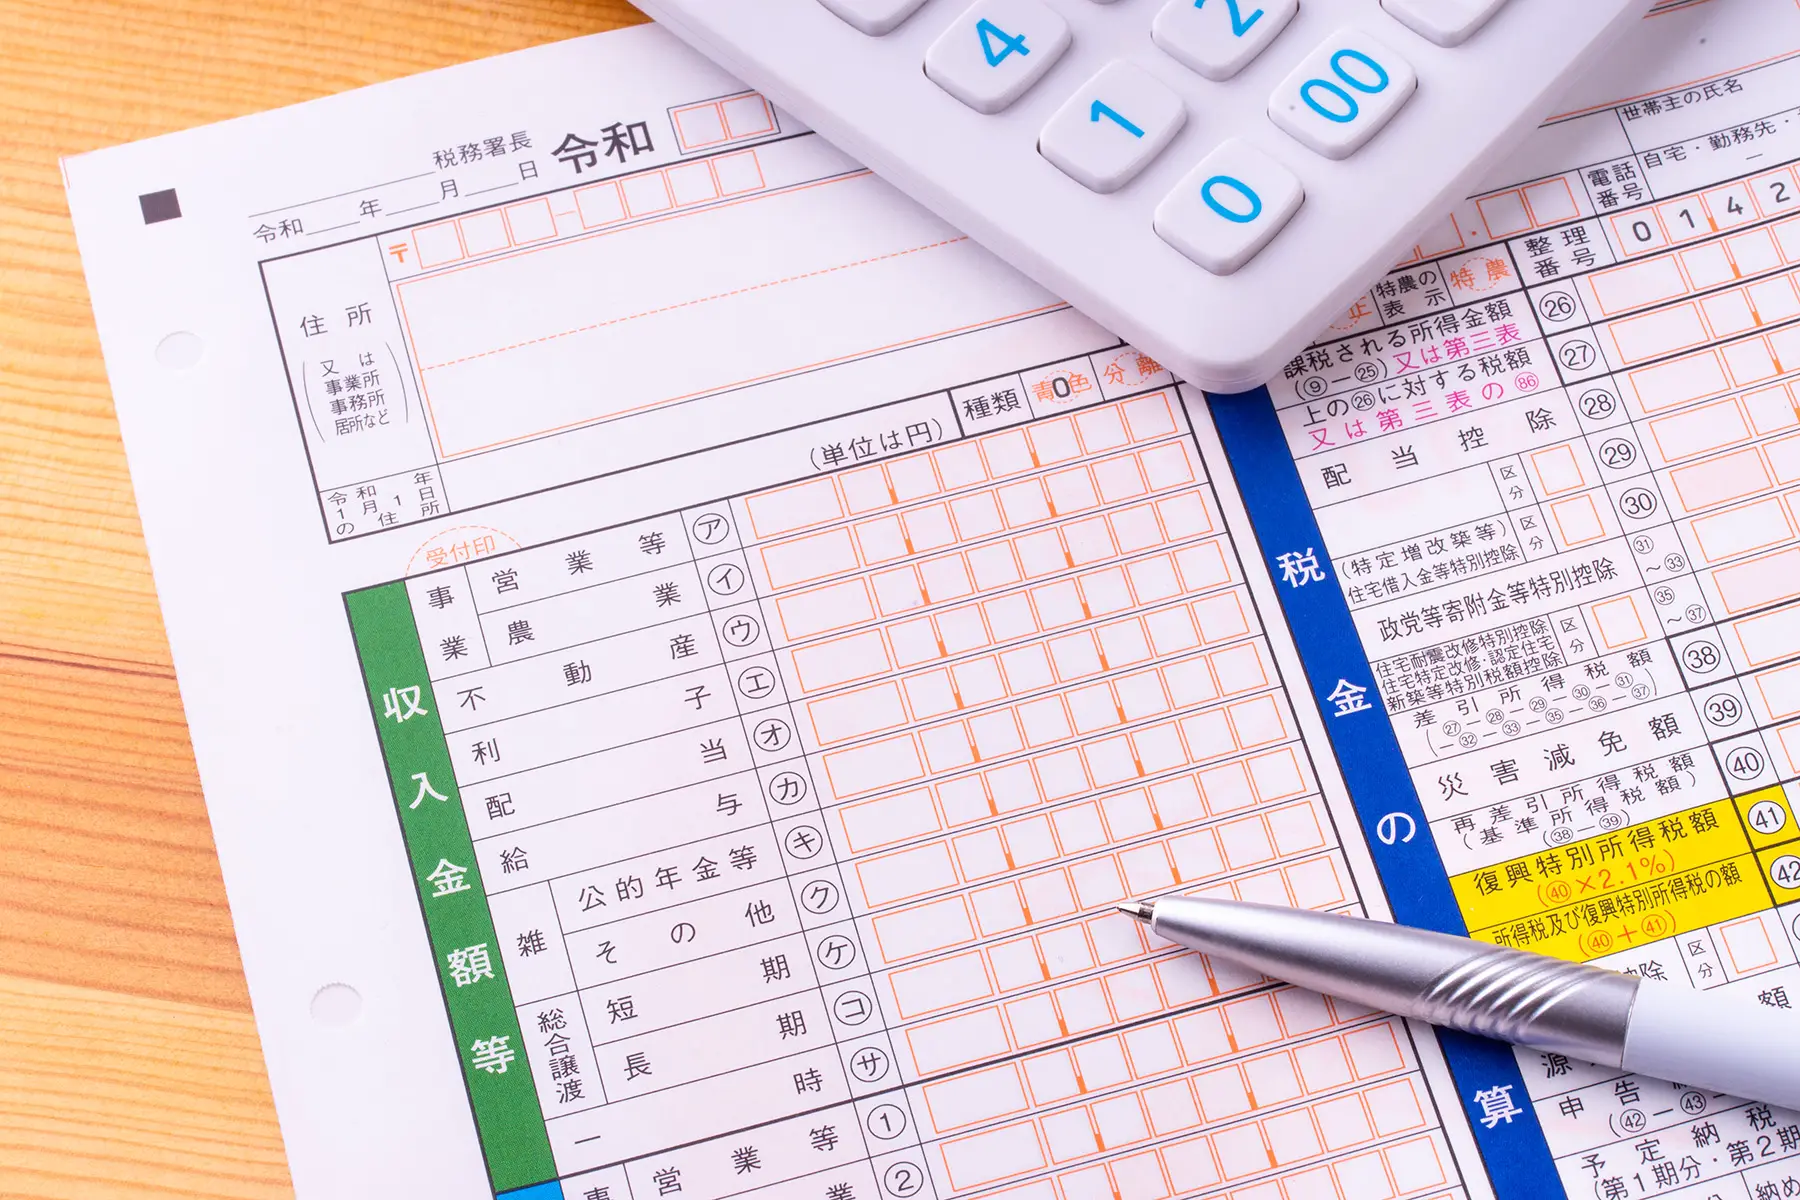 Japanese income tax form with a white calculator and a white pen